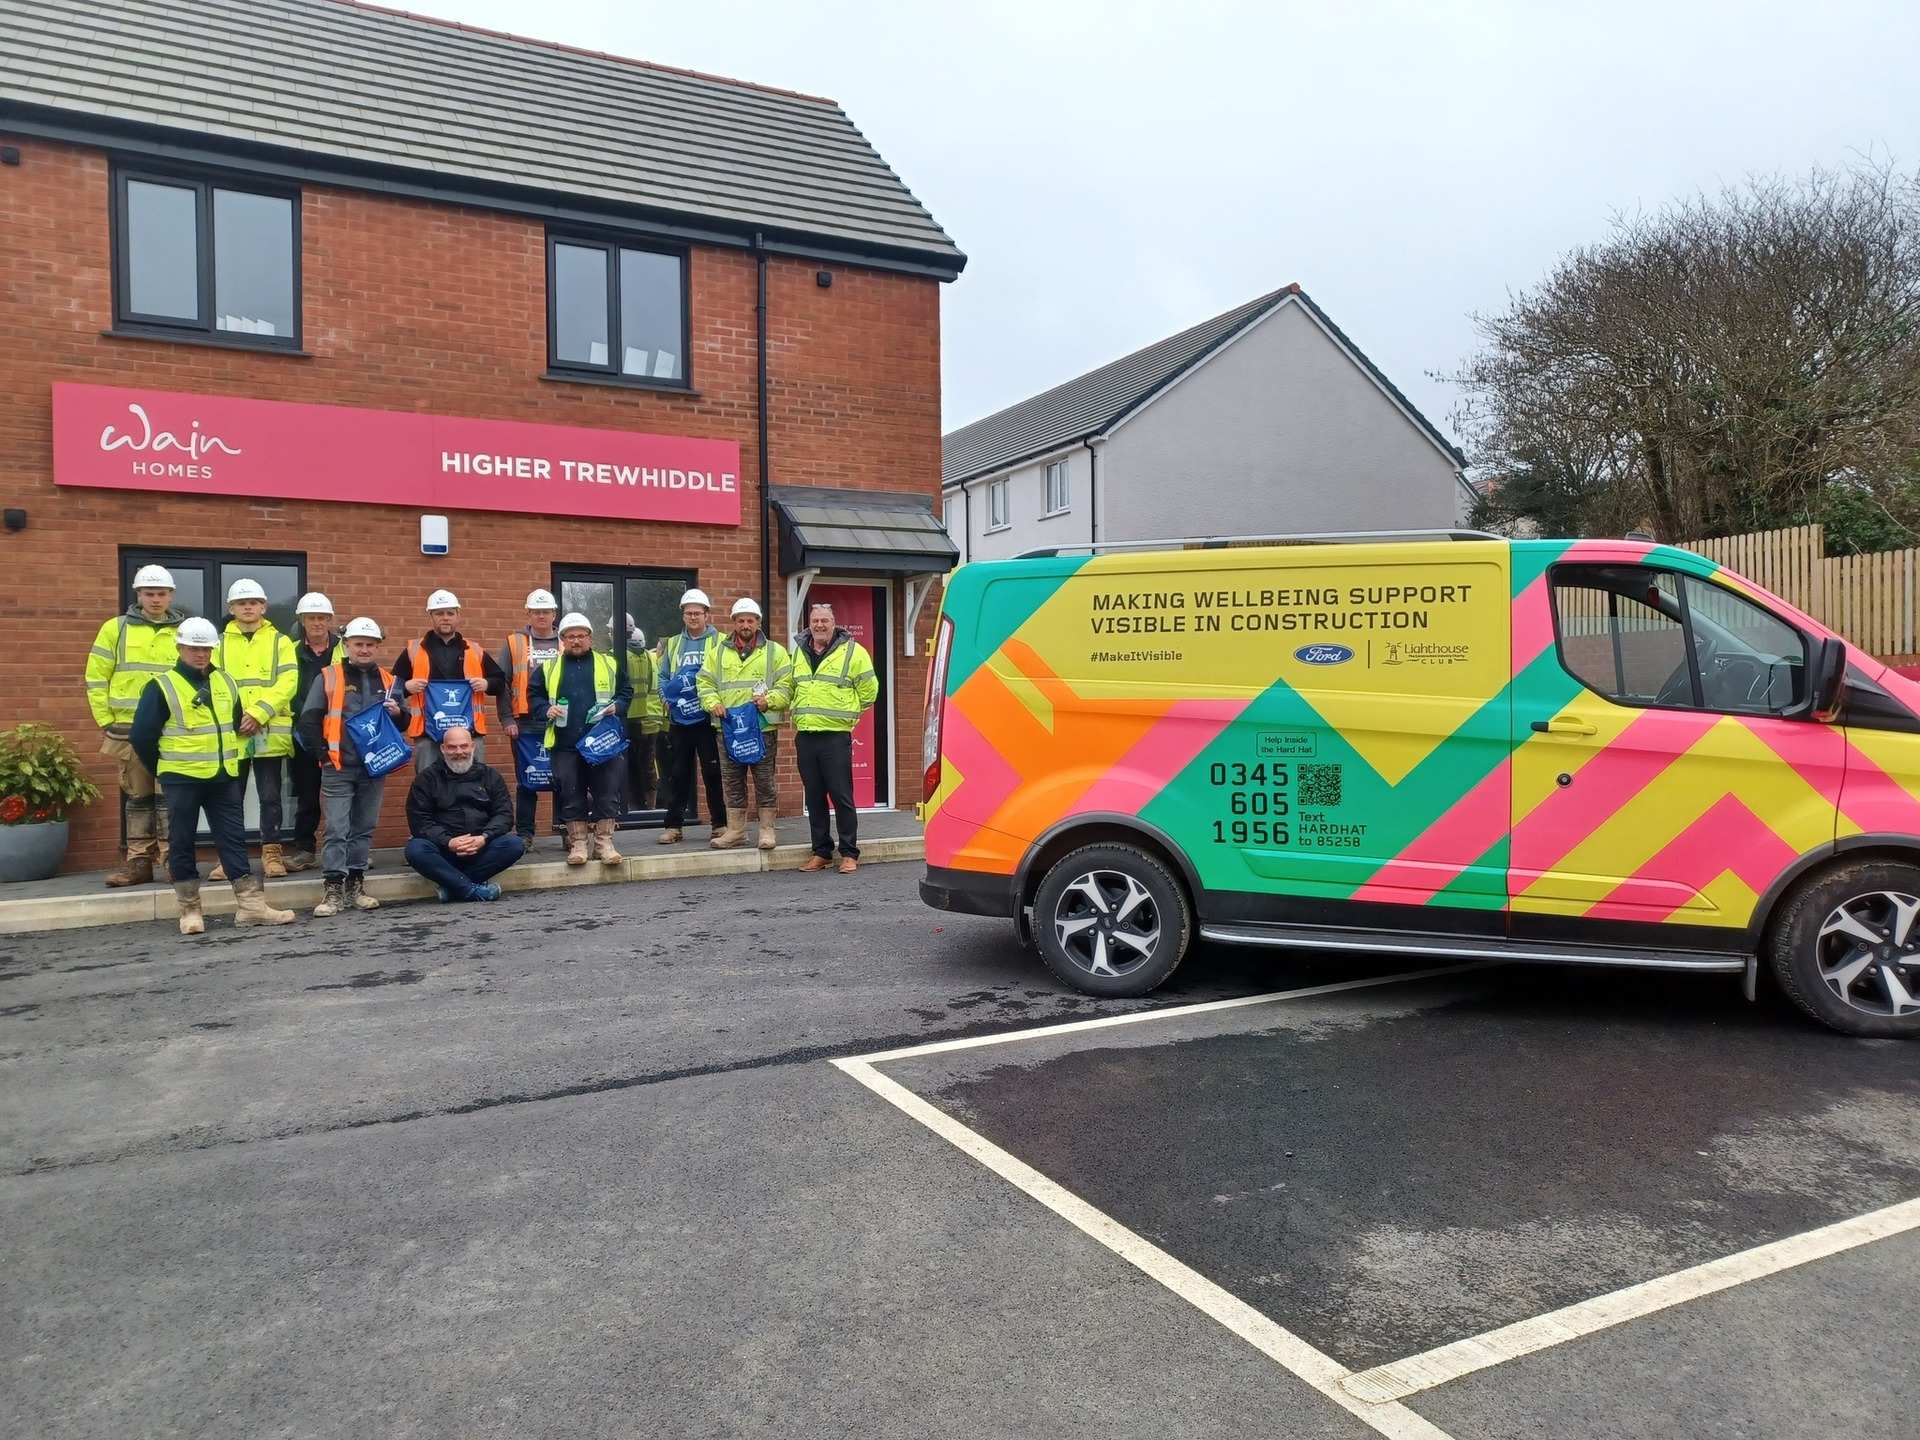 Charity Makes Wellbeing Visible at Wain Homes Developments